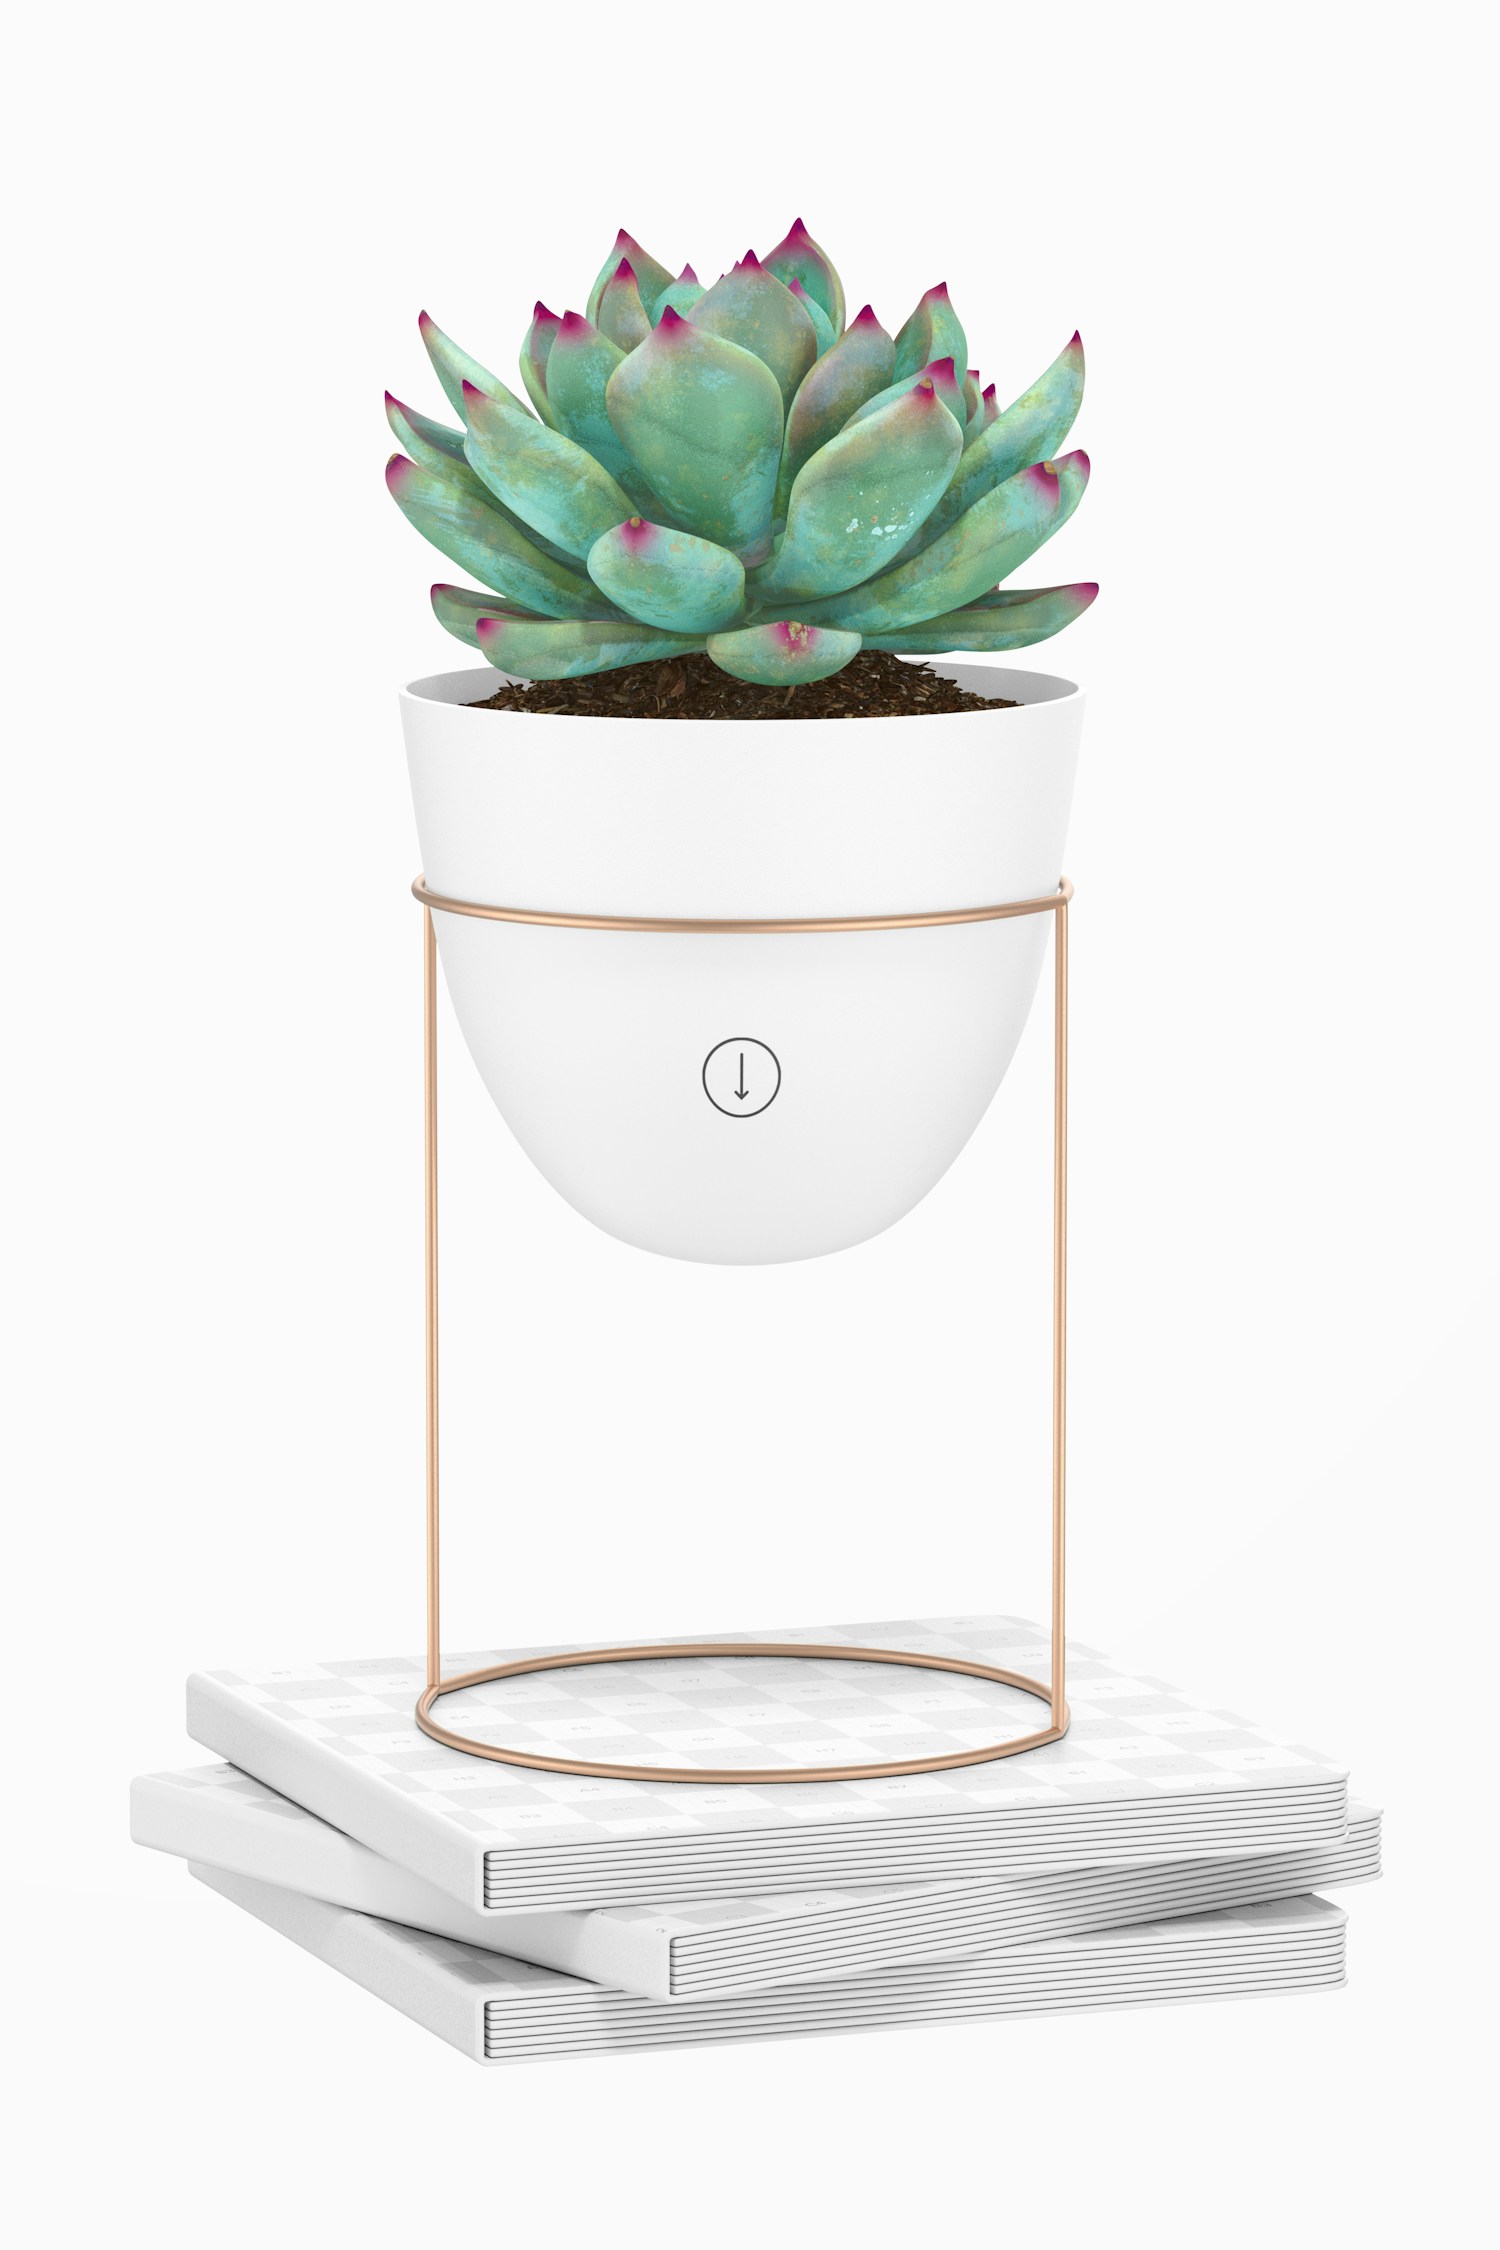 Oval Plant Pots with Stand Mockup